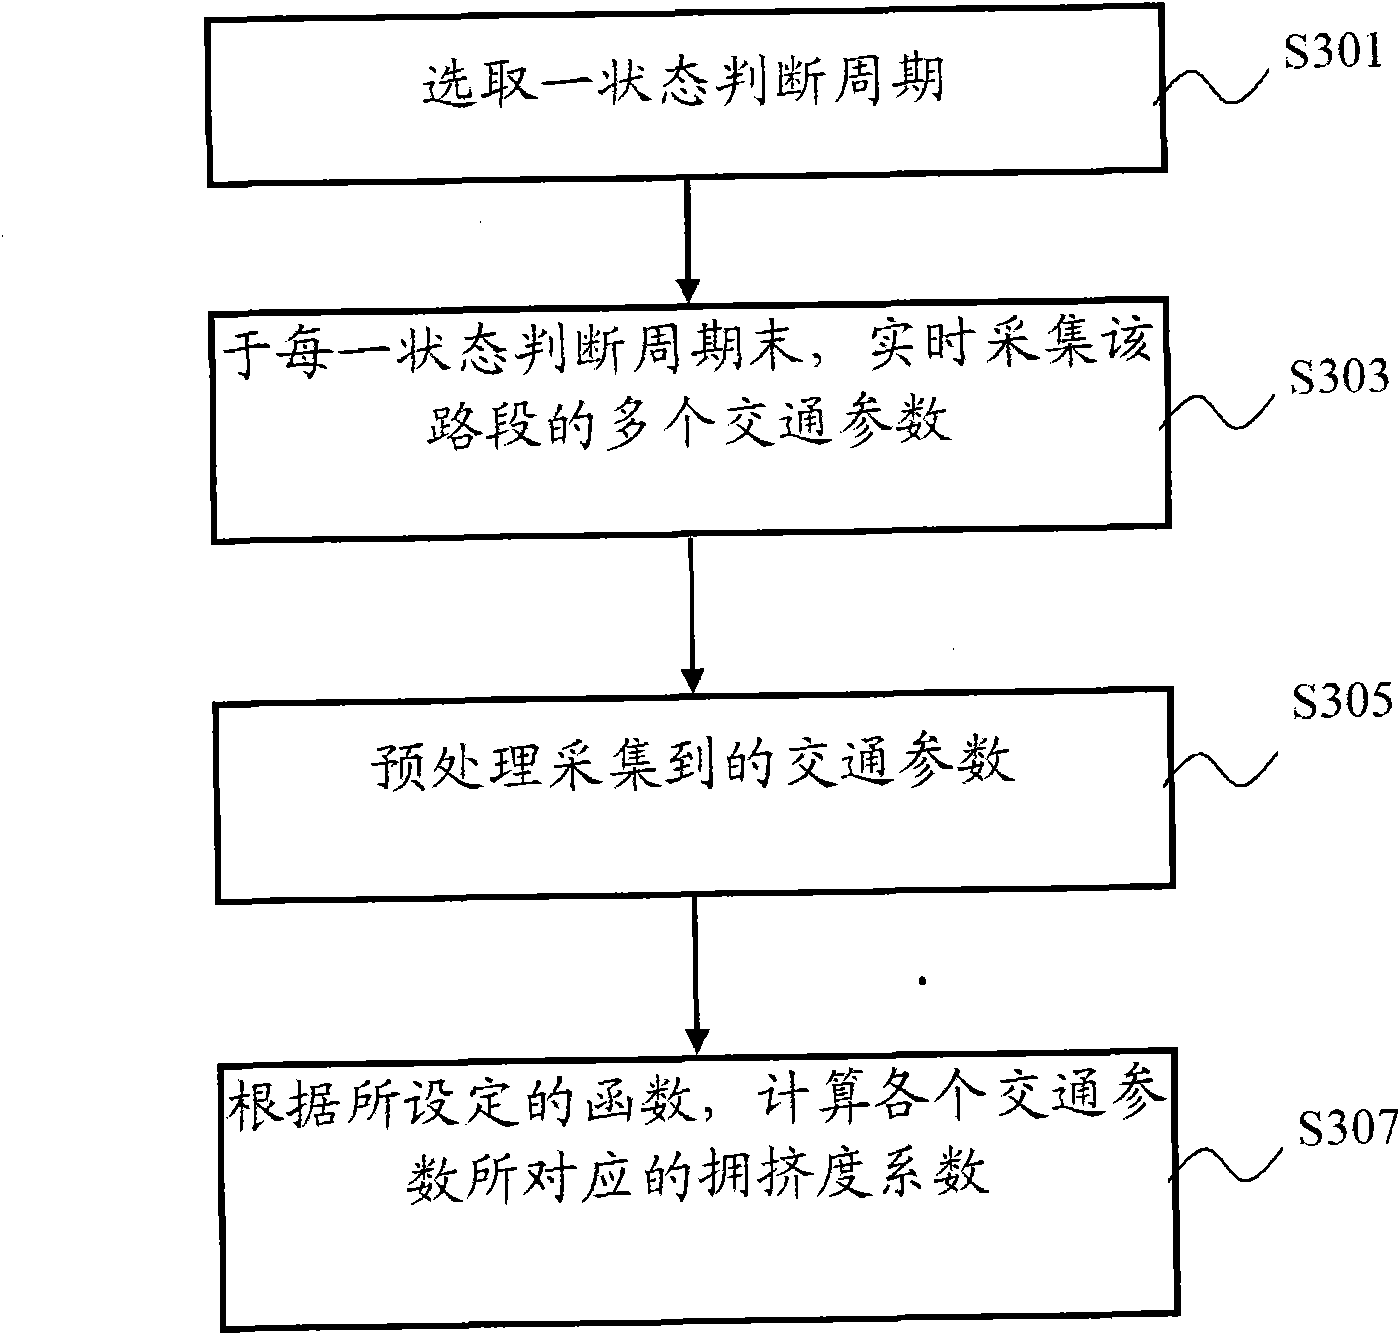 Method and system for judging road traffic states